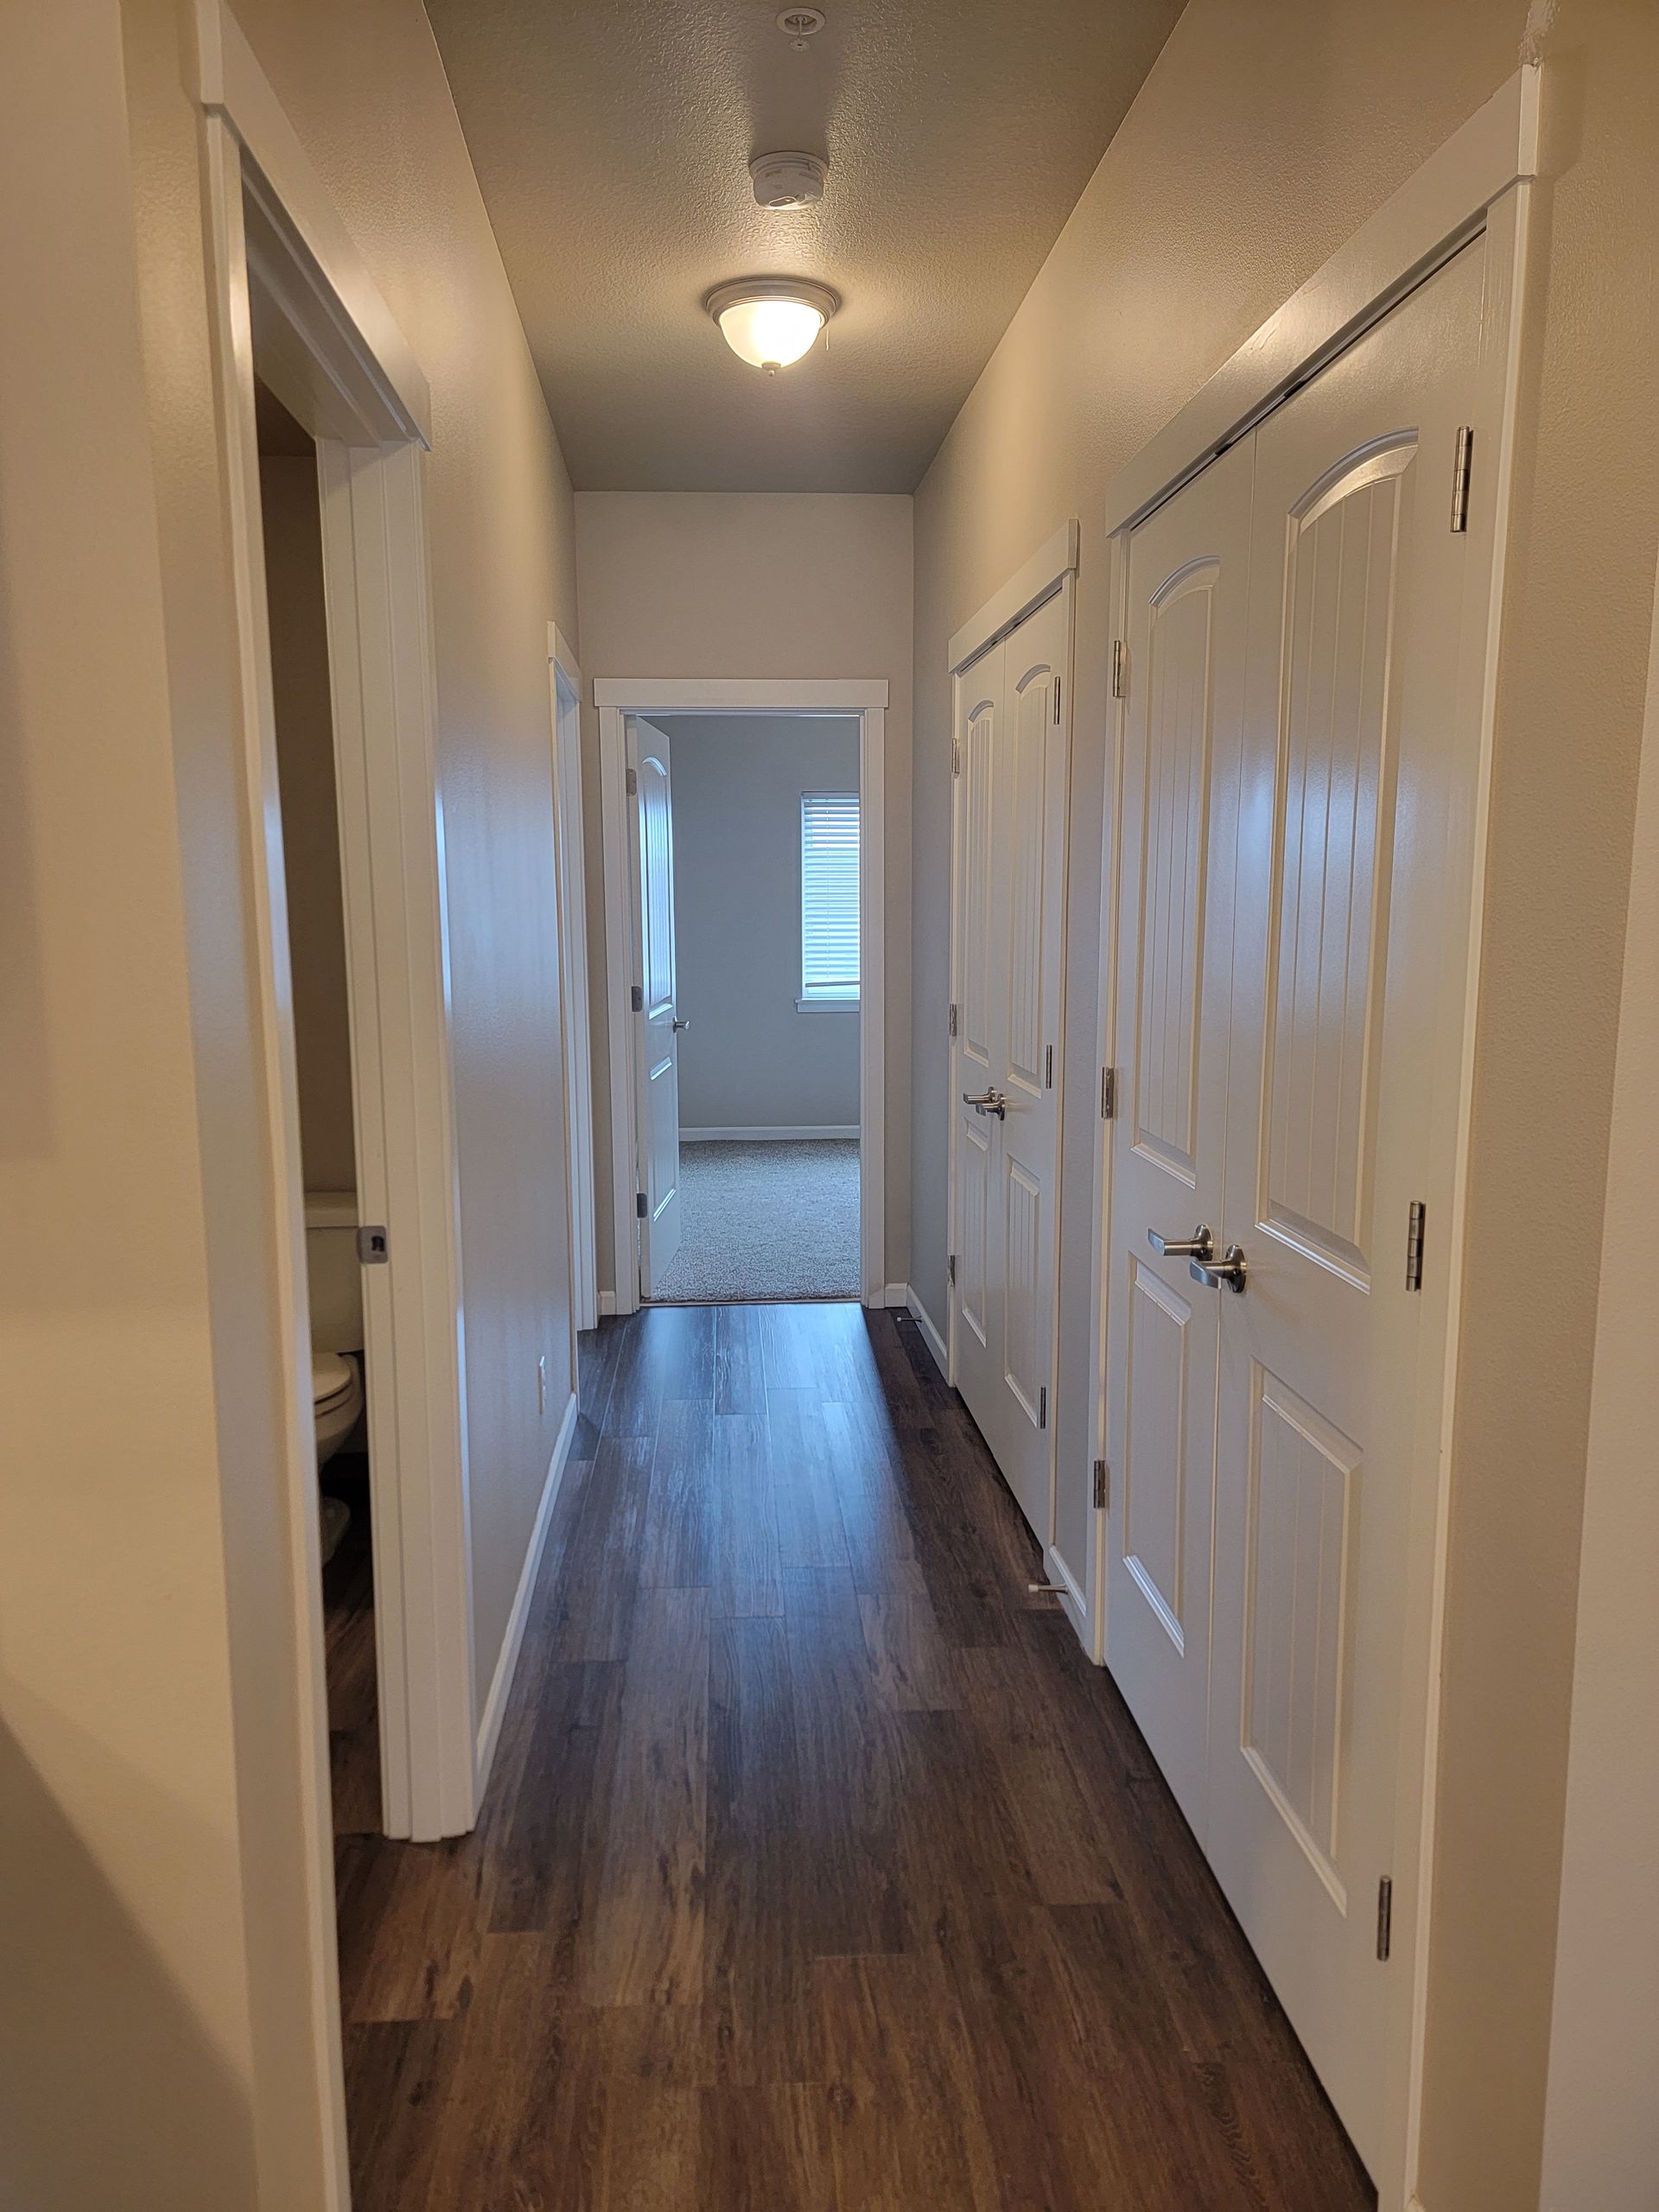 A long hallway with hardwood floors and white doors leading to a bedroom.